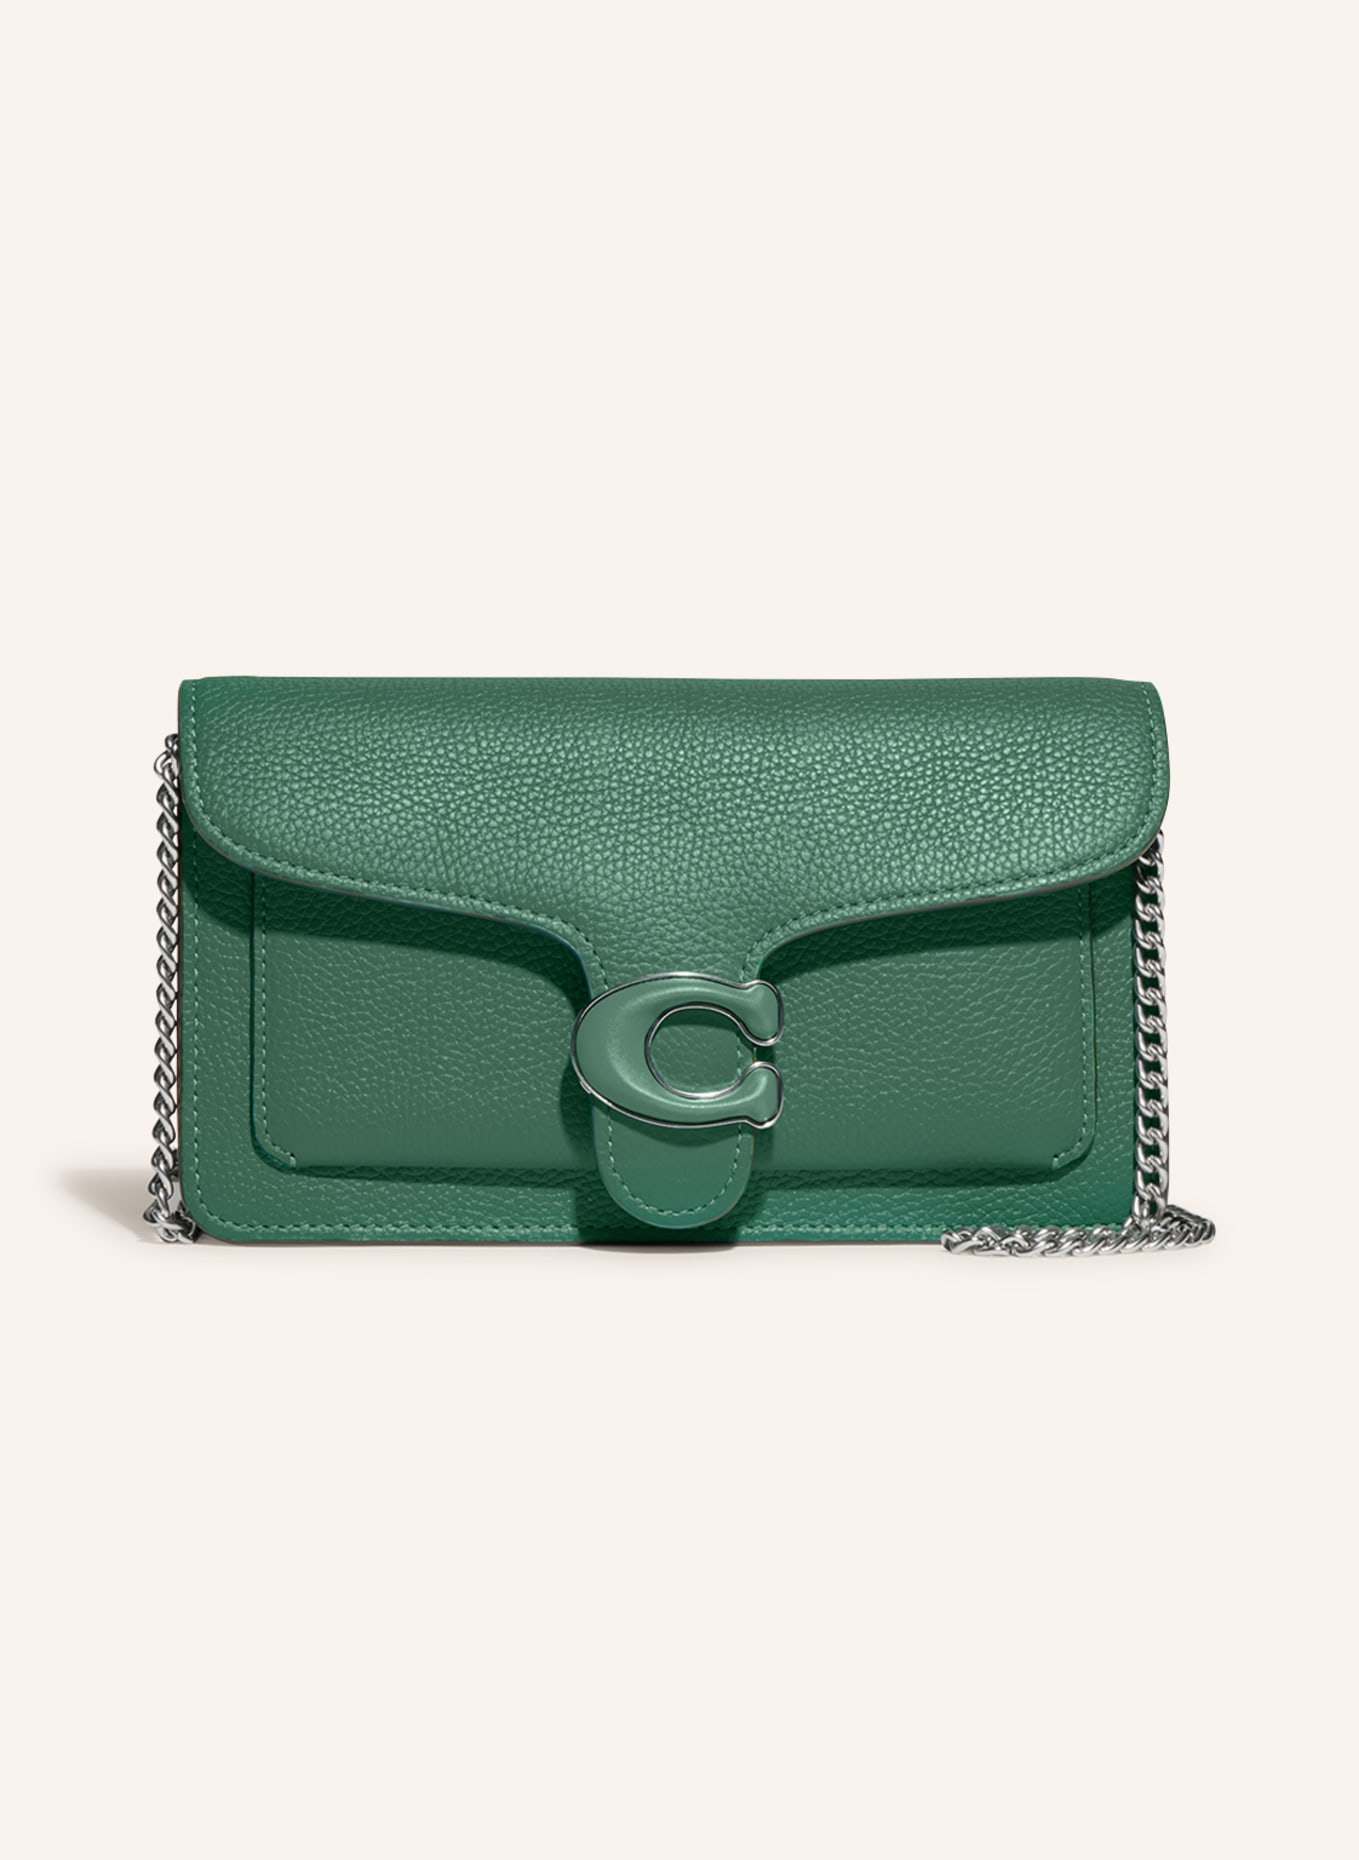 Coach Green Pebbled Leather Small Shadow Chain Strap Crossbody Bag - $350